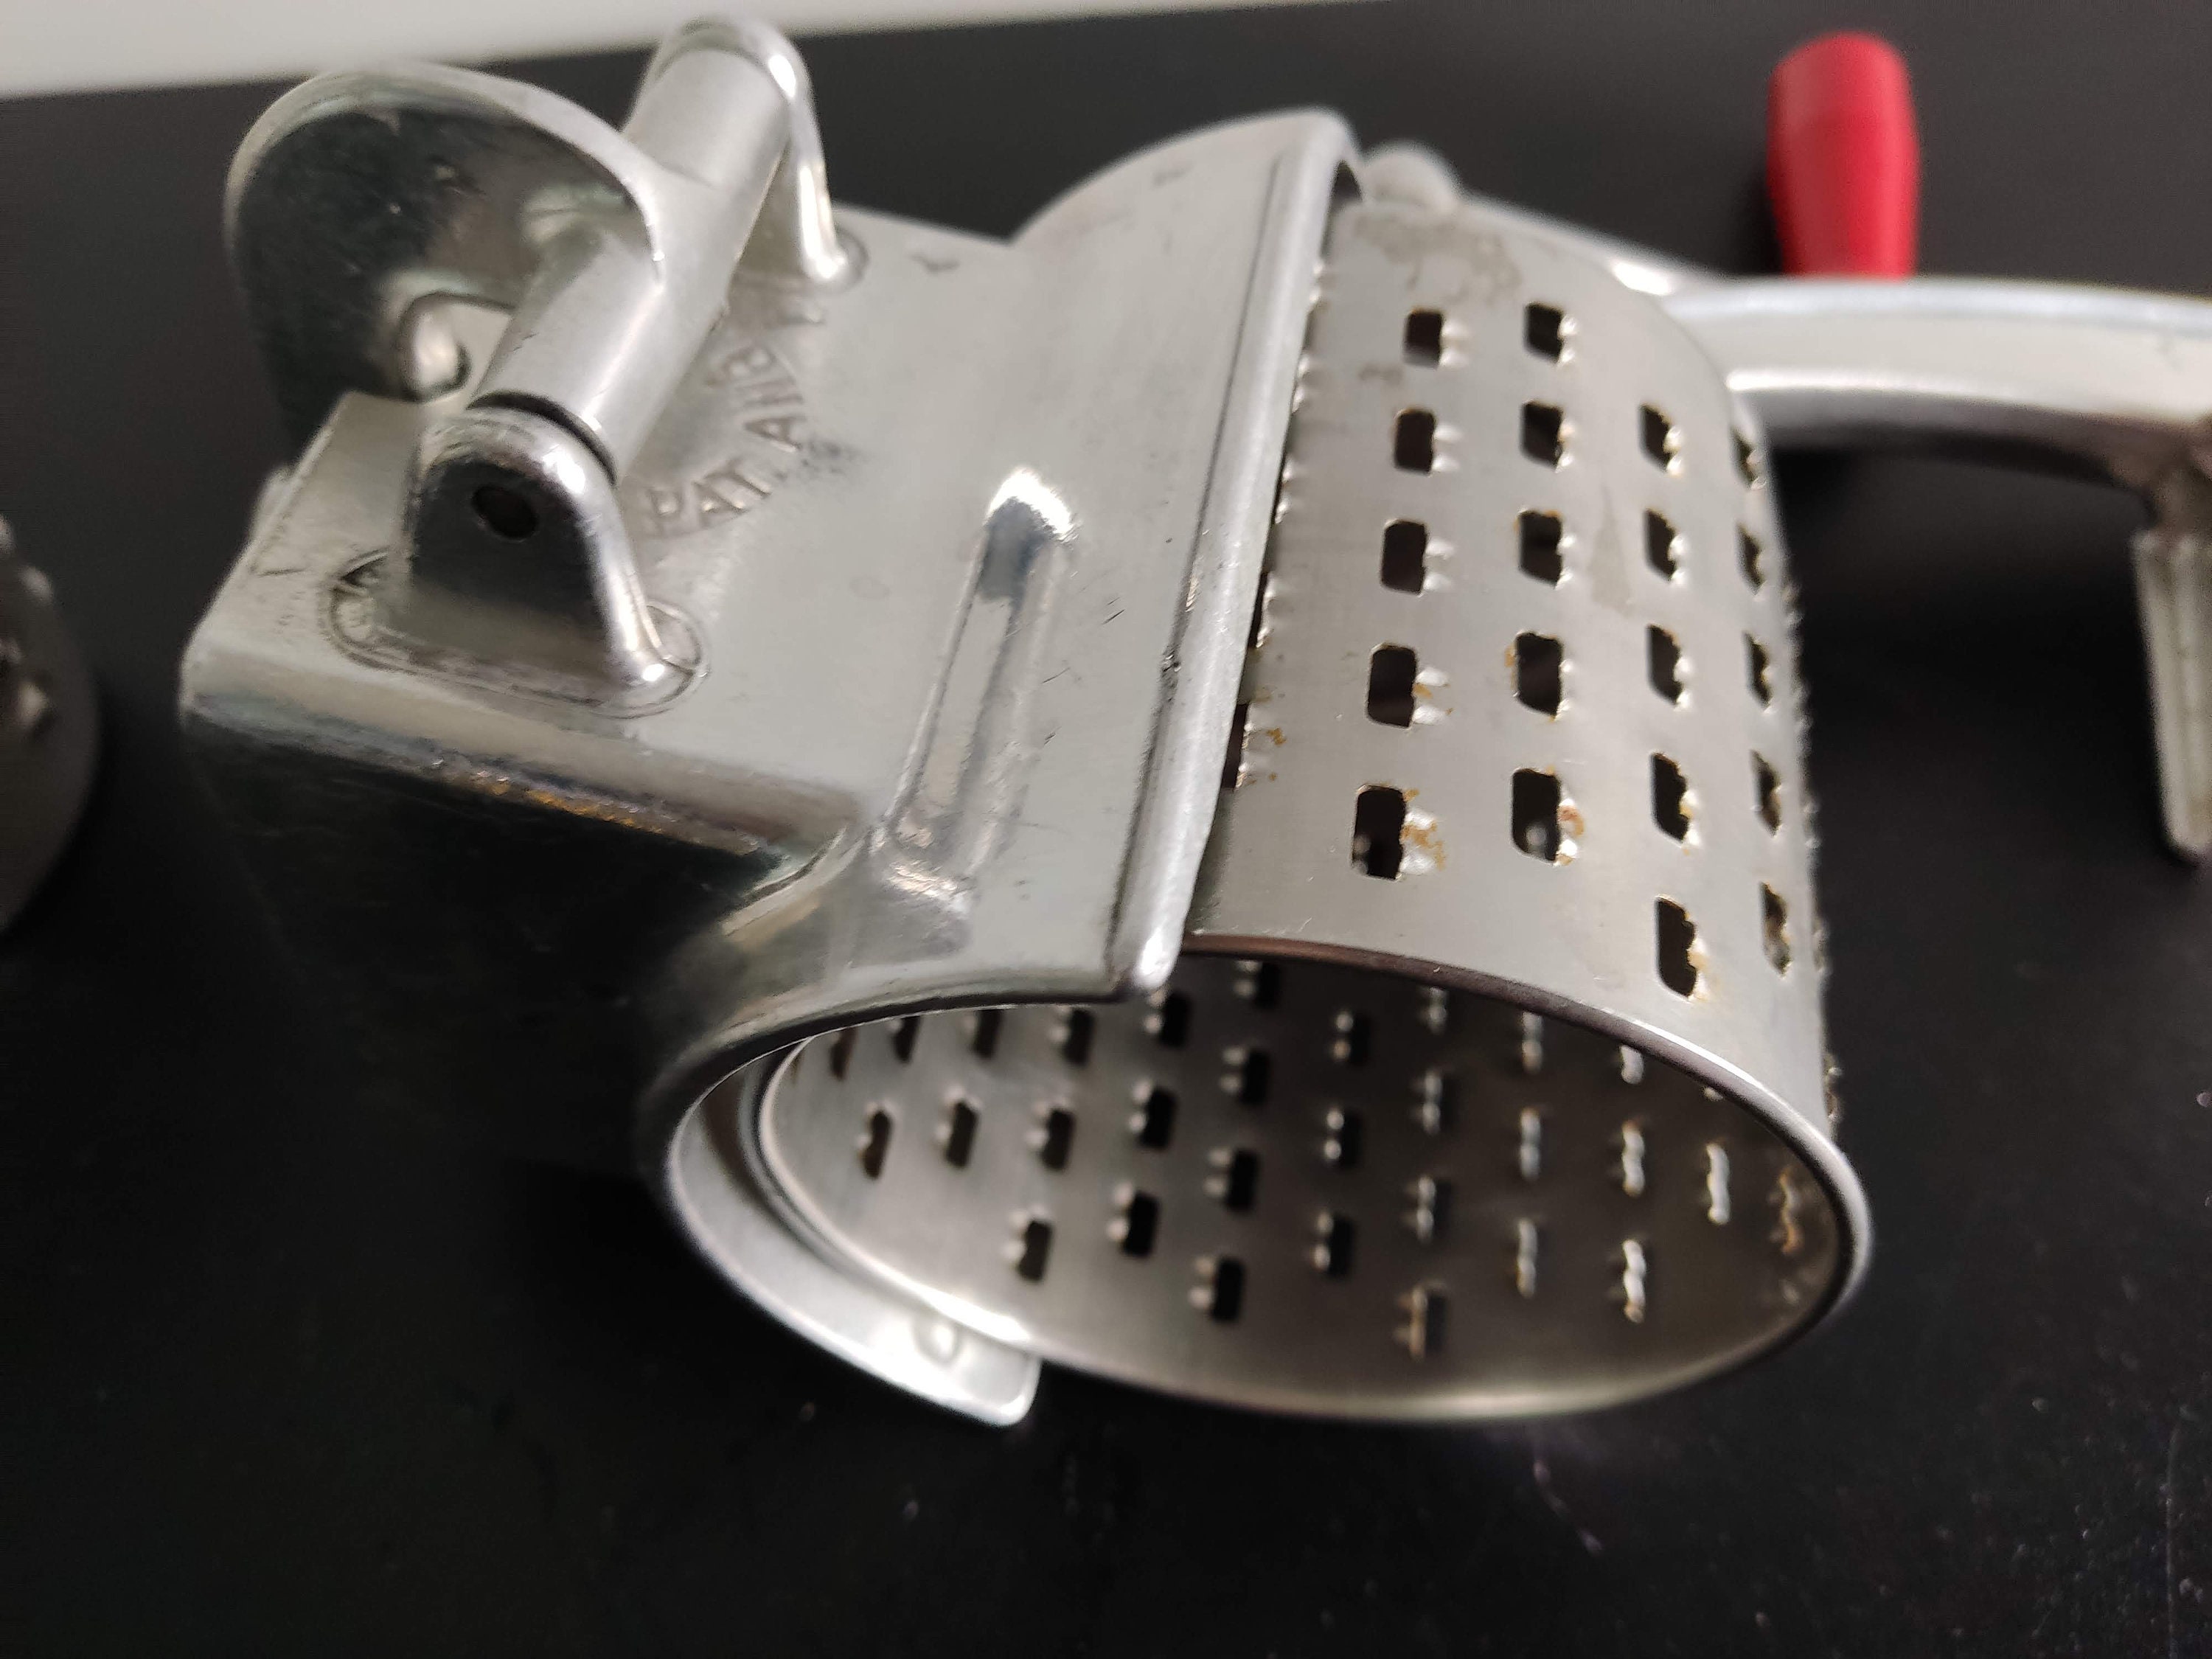 Fantes Cheese Grater with Suction-Base and 2 Drums, The Italian Market  Original since 1906